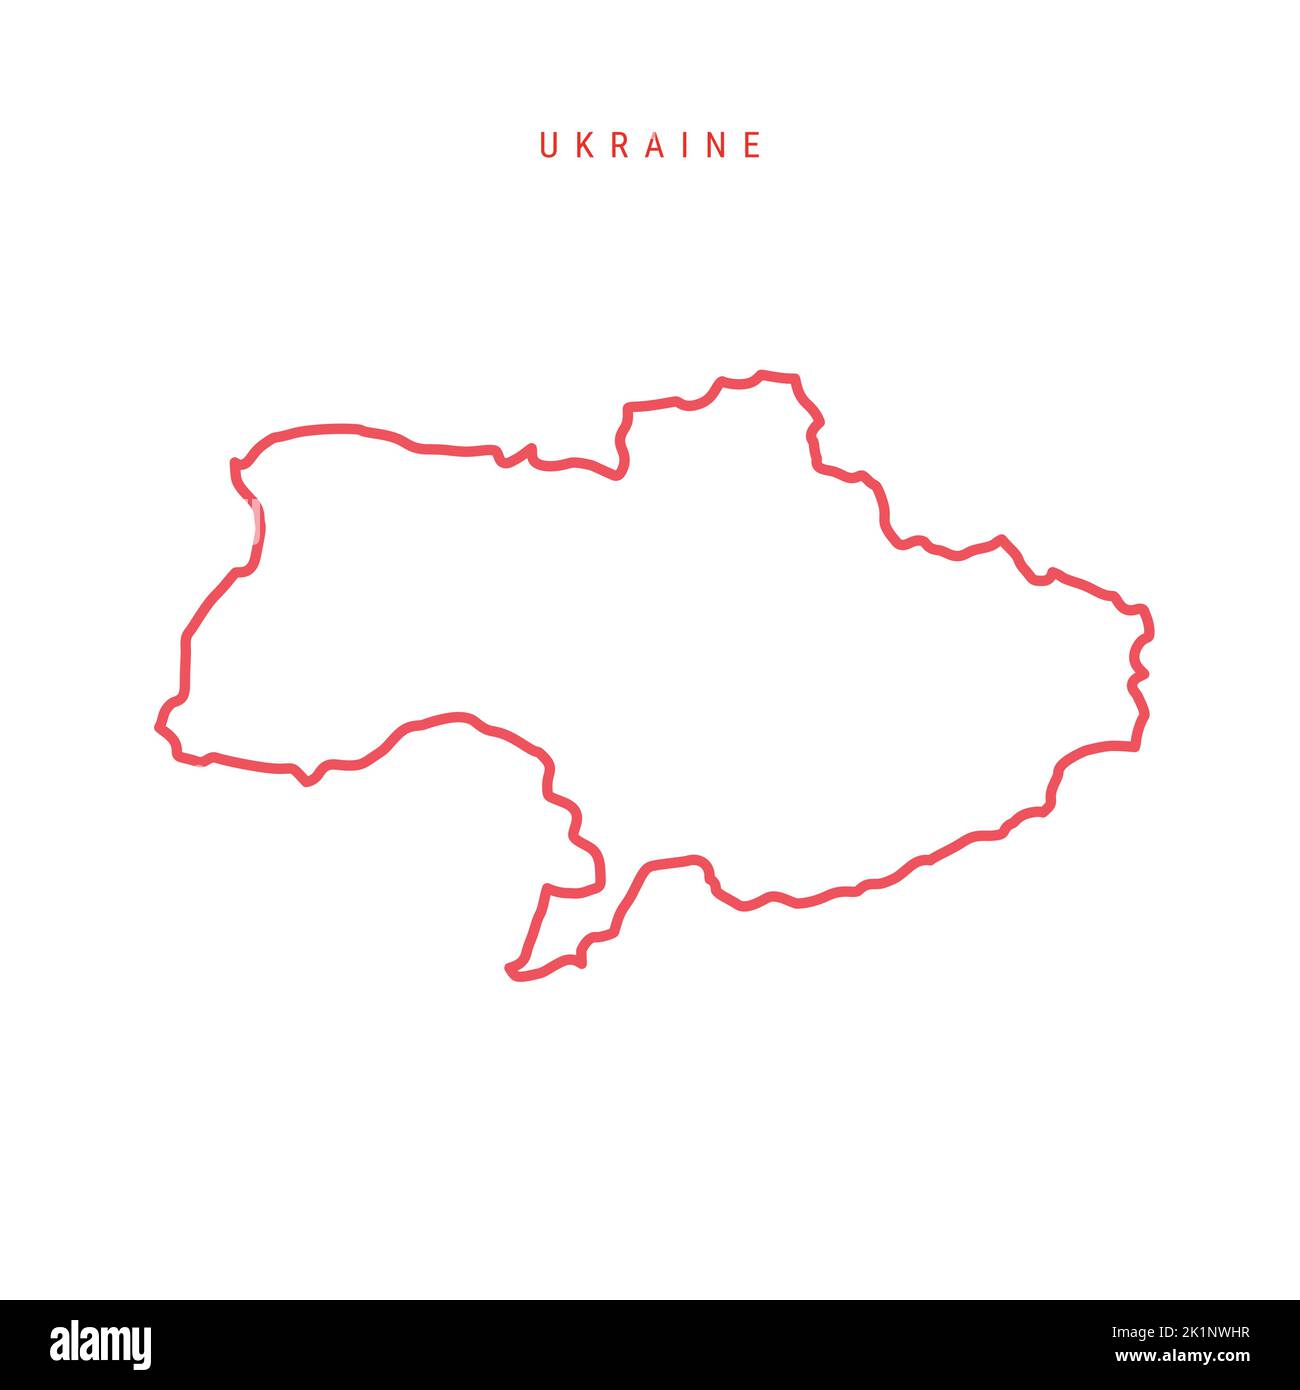 Ukraine editable outline map. Ukrainian red border. Country name. Adjust line weight. Change to any color. Vector illustration. Stock Vector